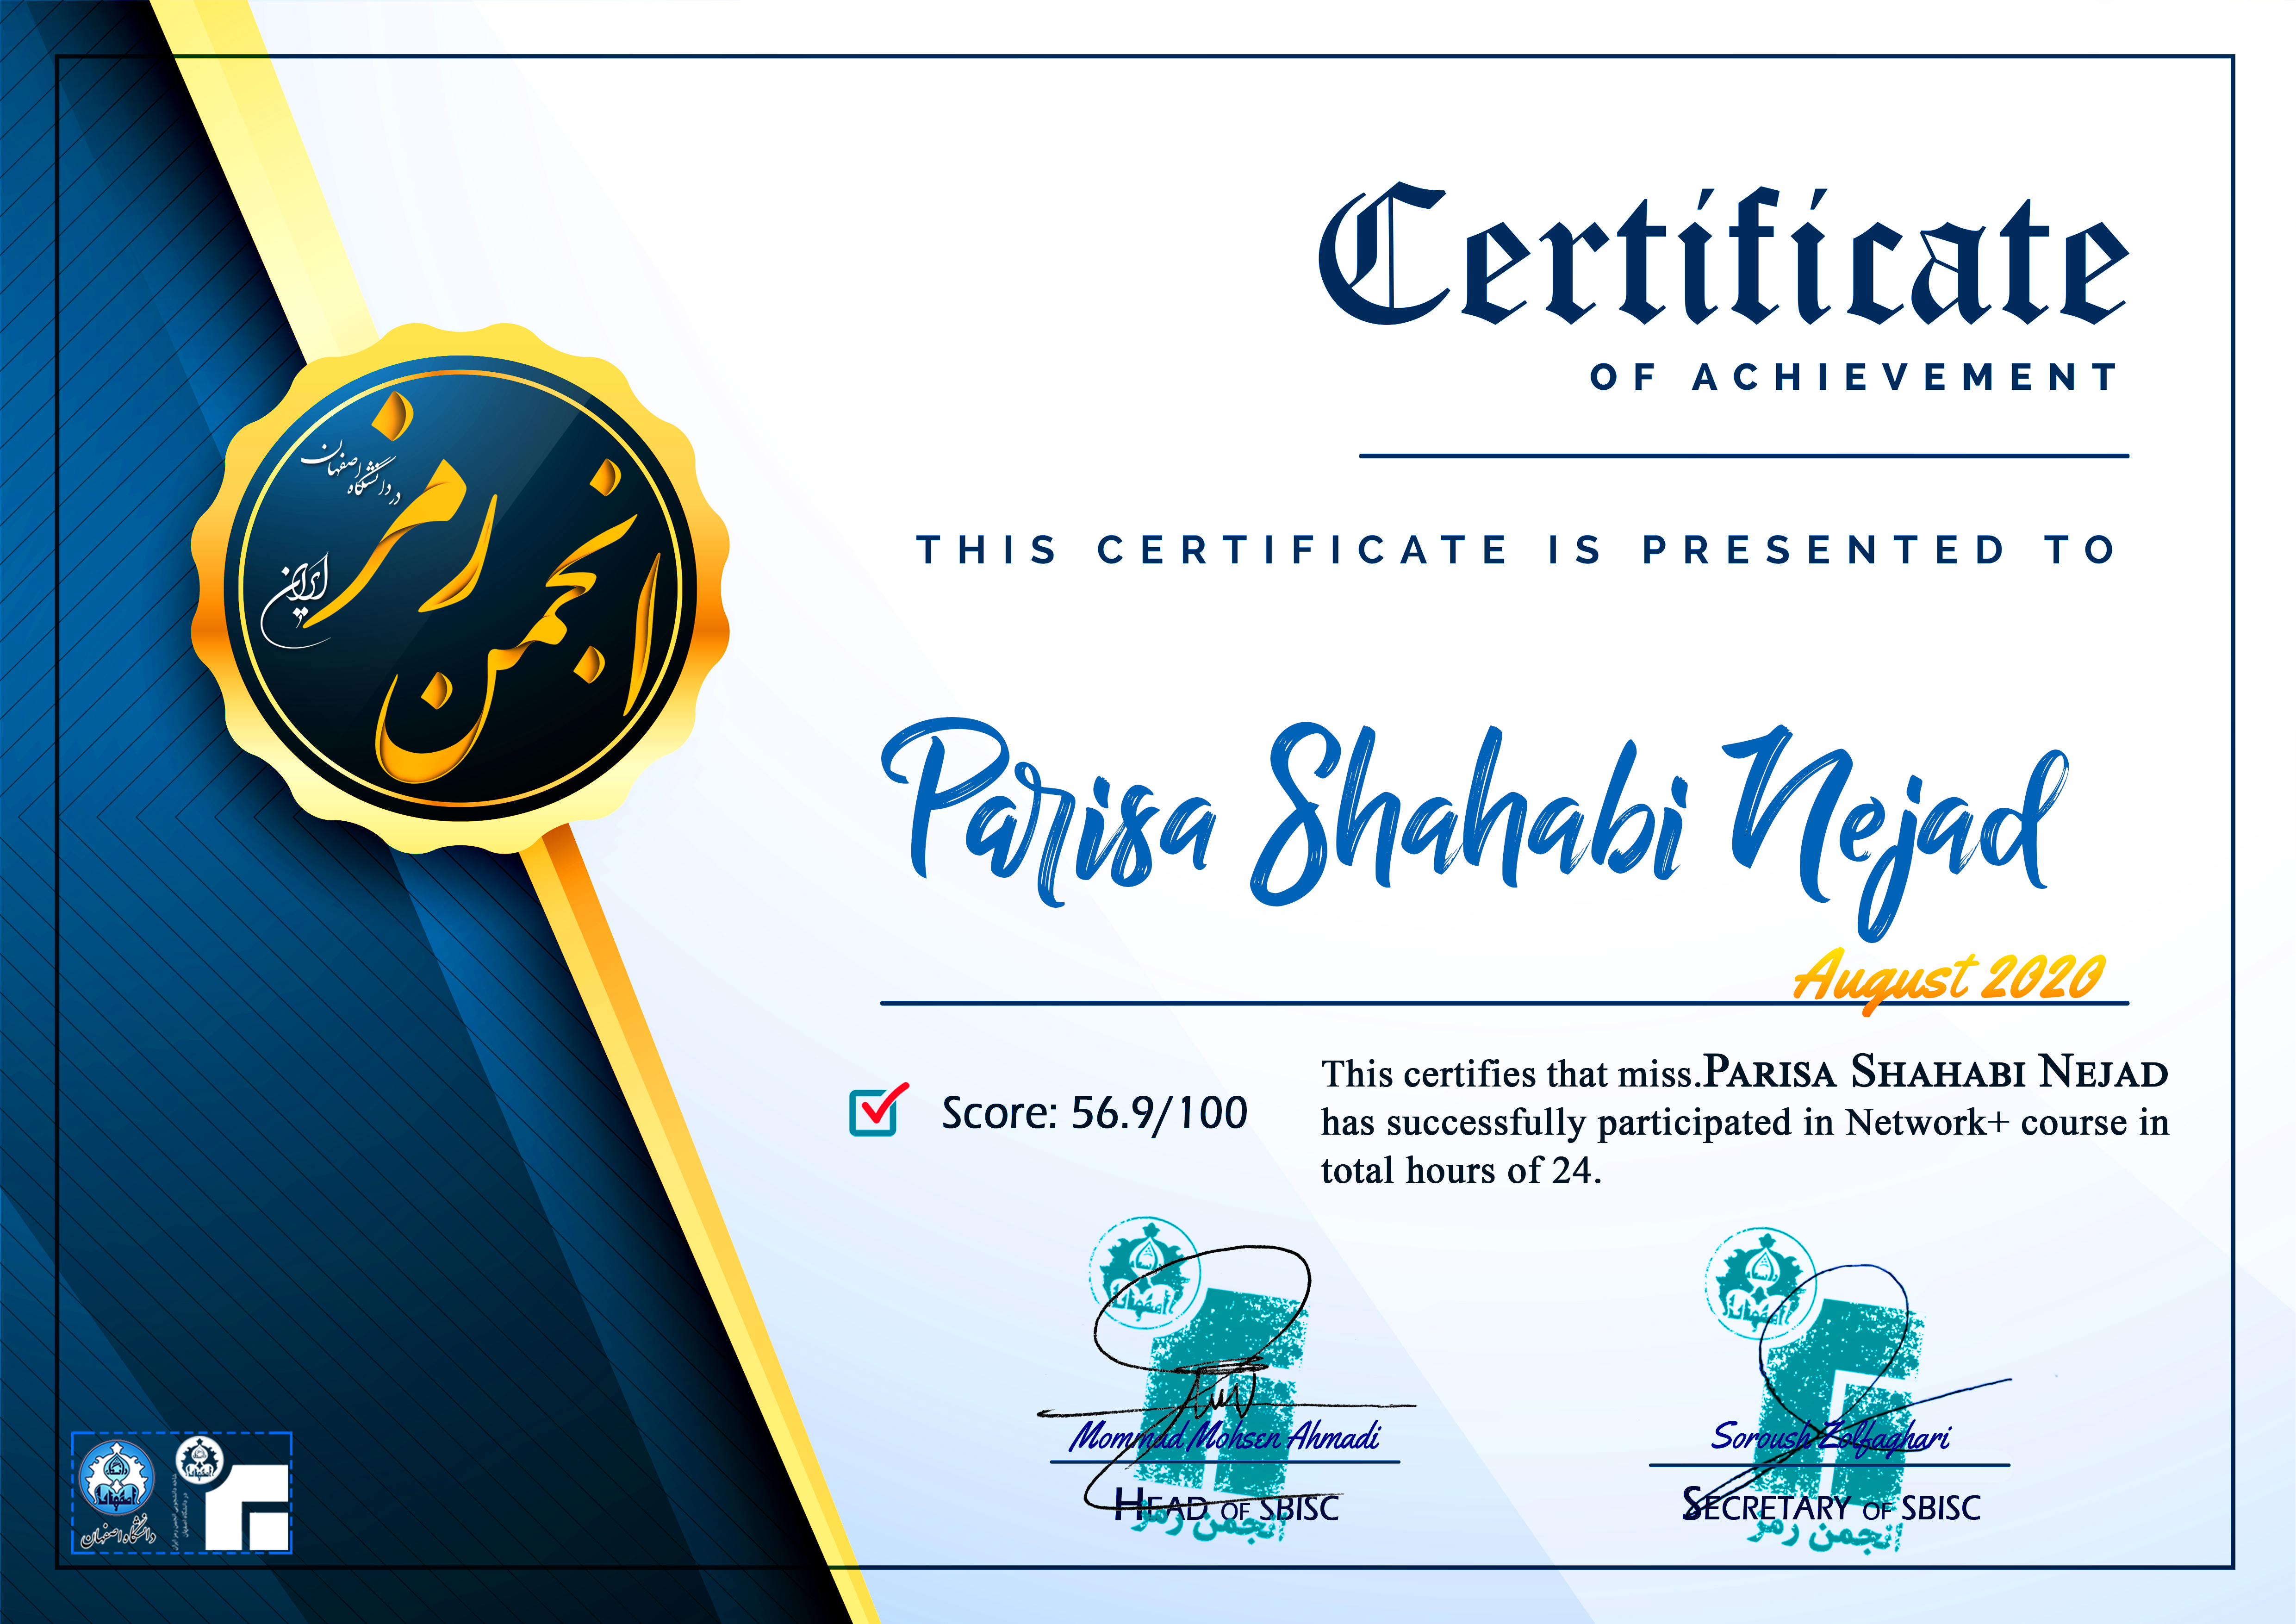 Network+ Course Certificate